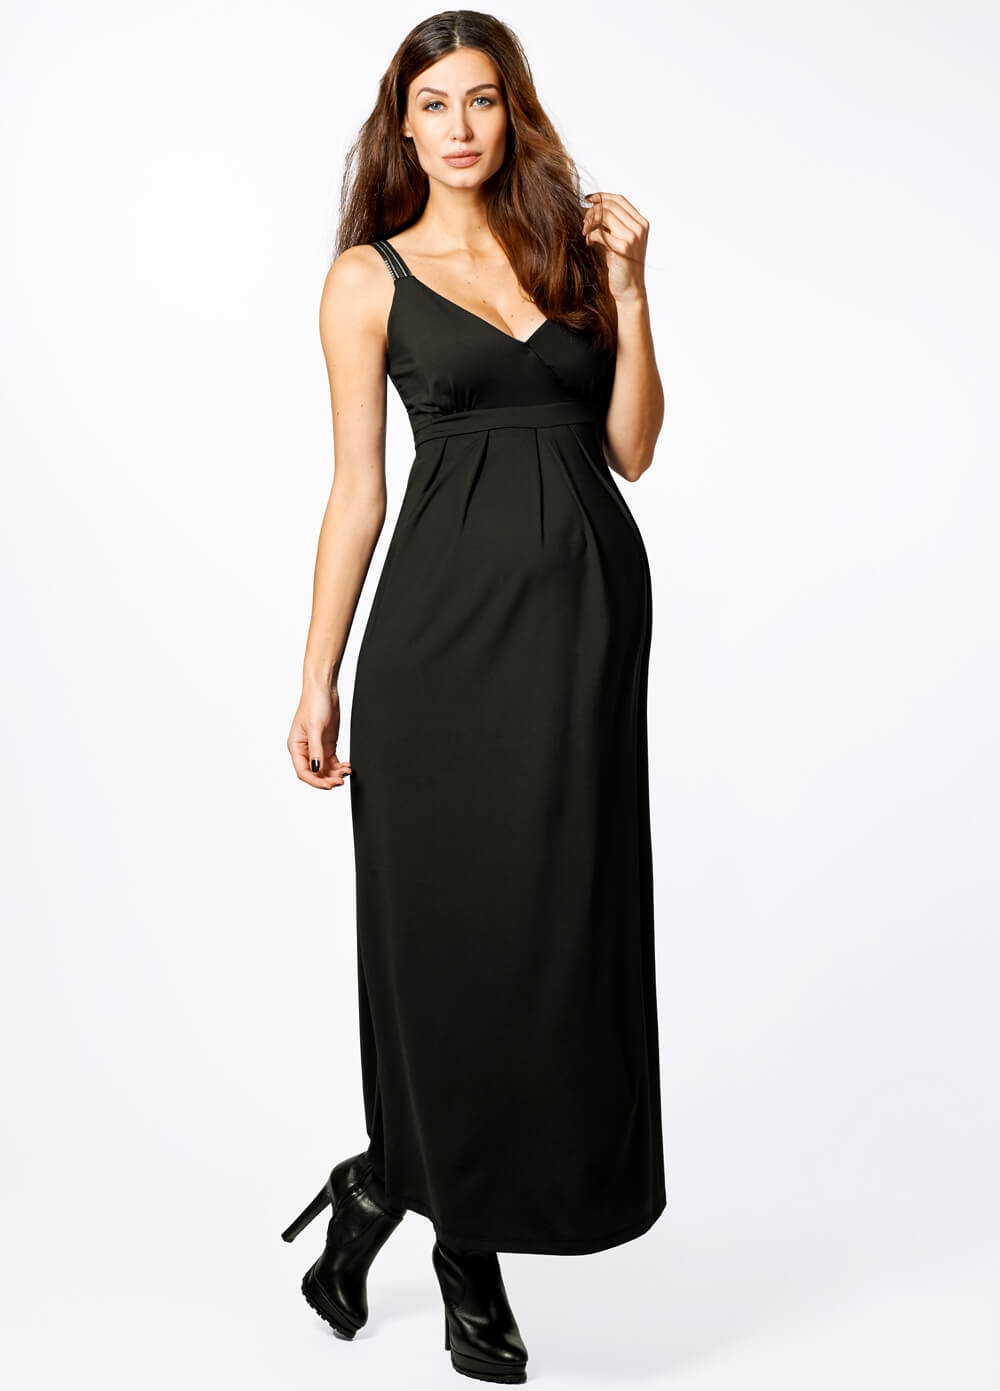 Celeste Maternity Evening Maxi Gown in Black by Noppies